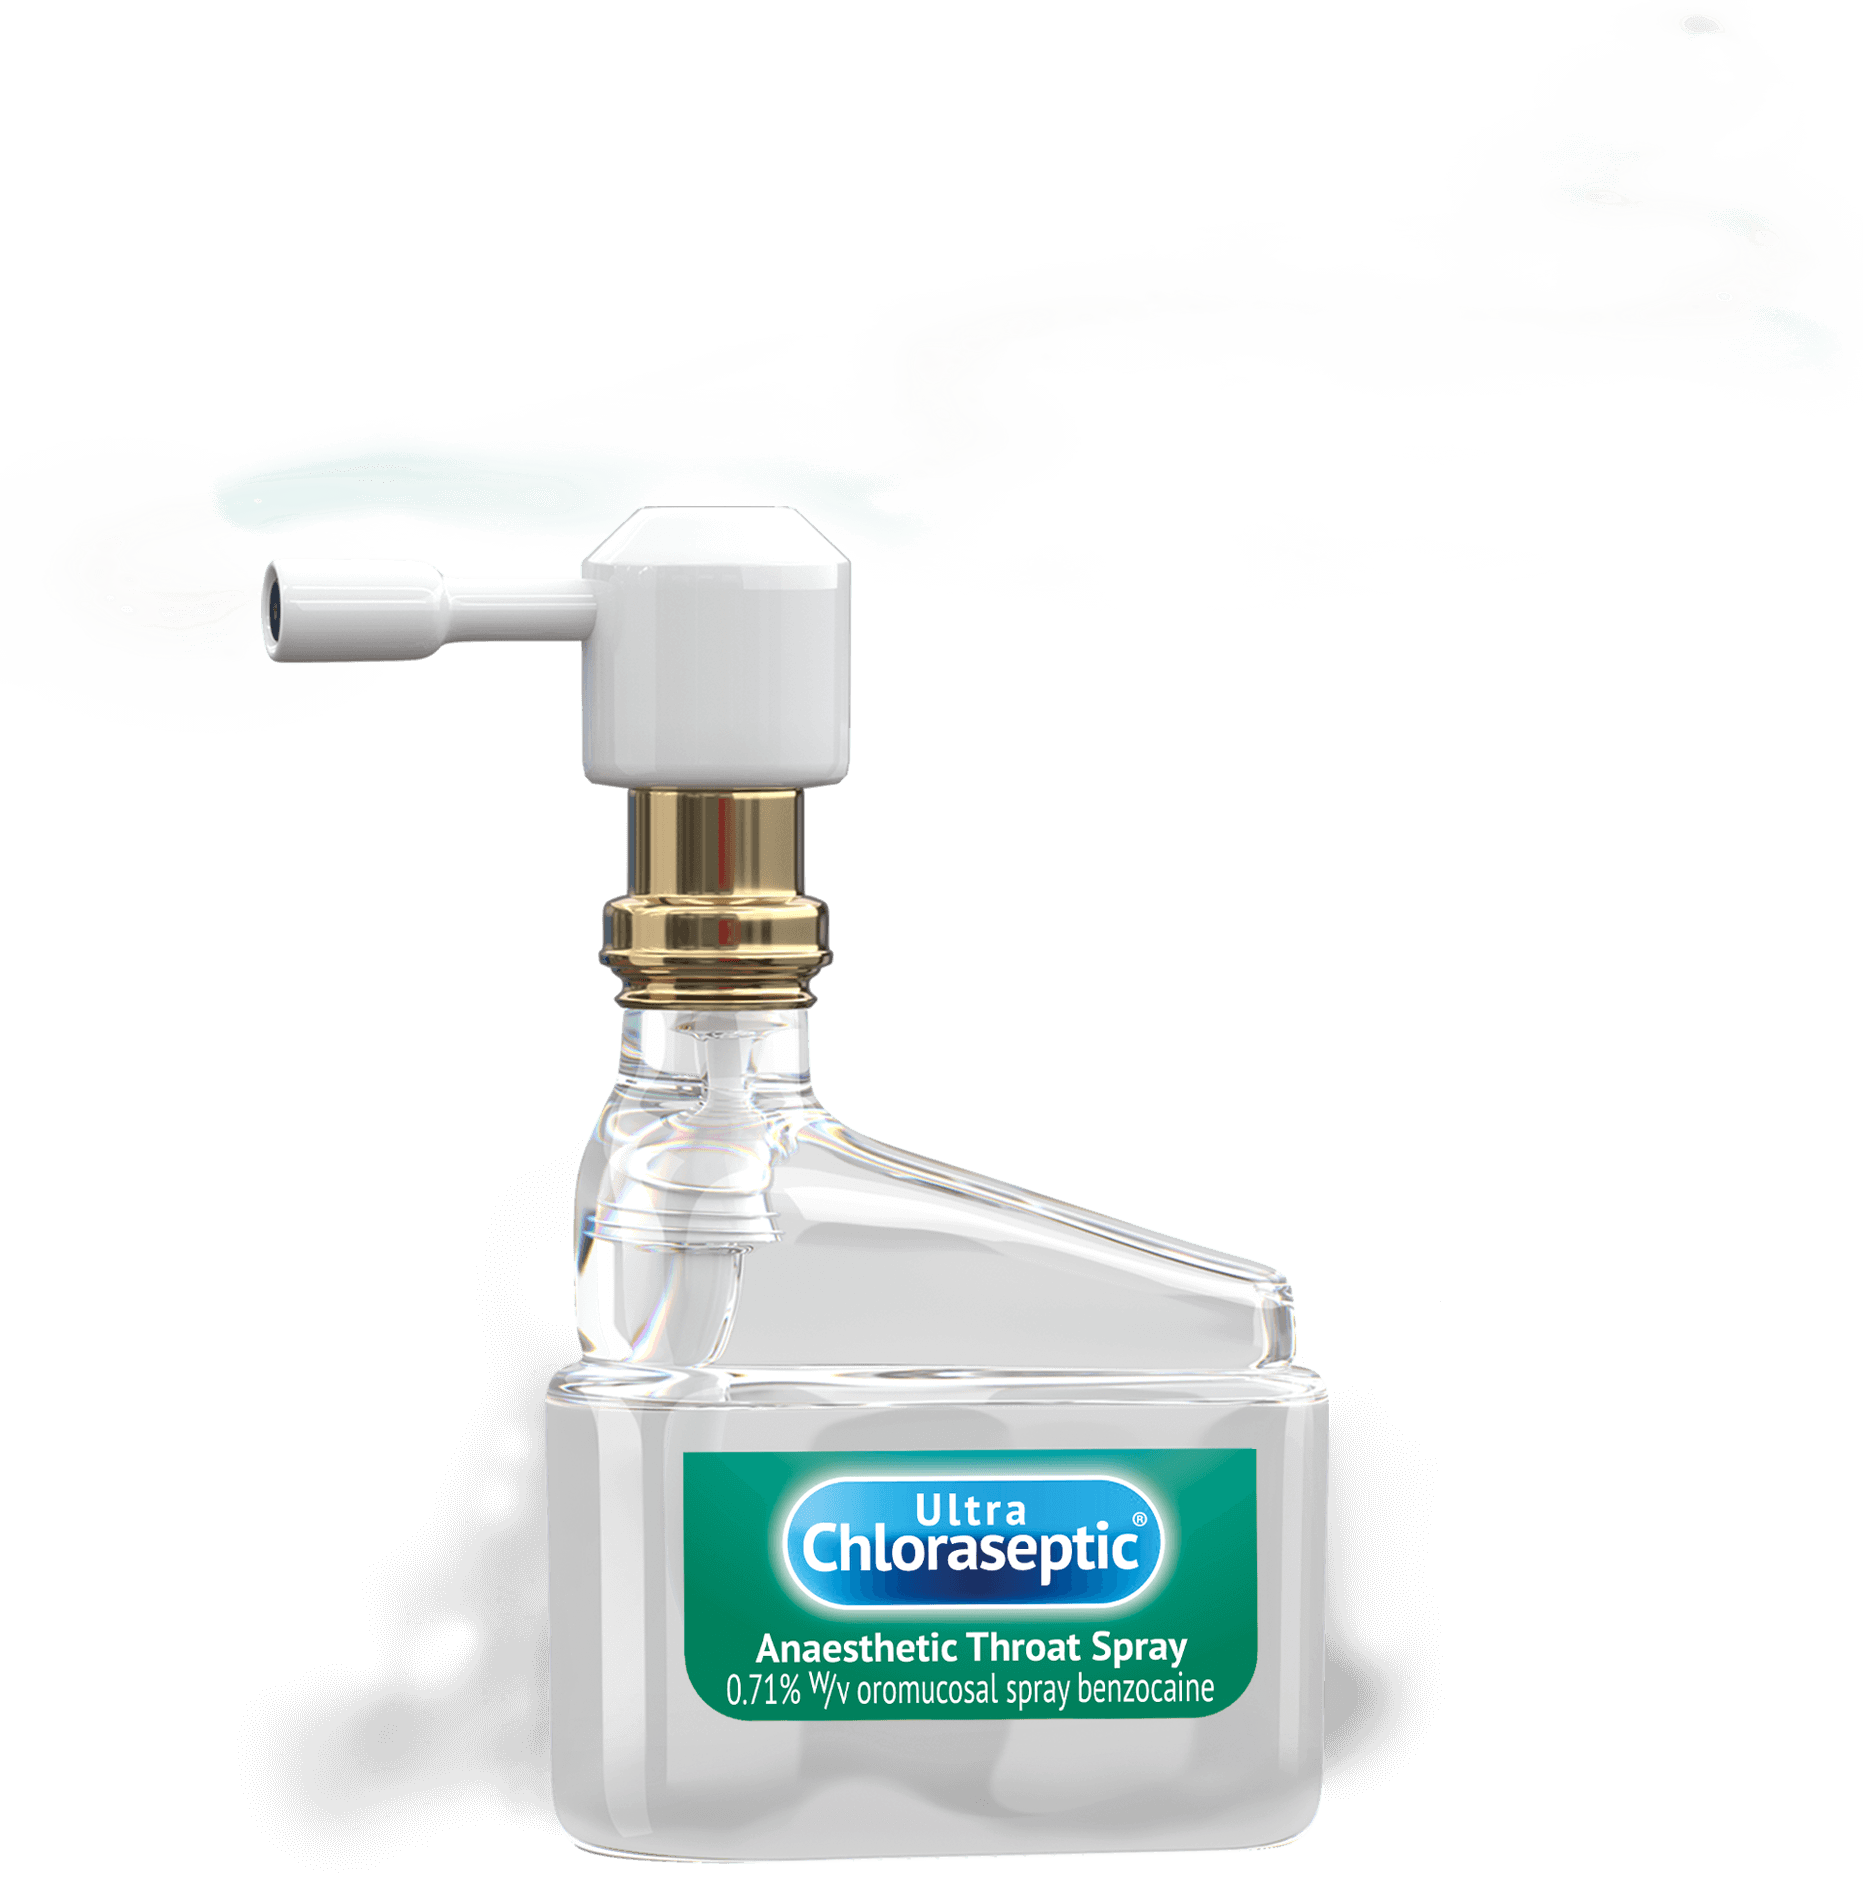 Ultra Chloraseptic Anaesthetic Menthol Flavoured Throat Spray in a translucent bottle against a white background